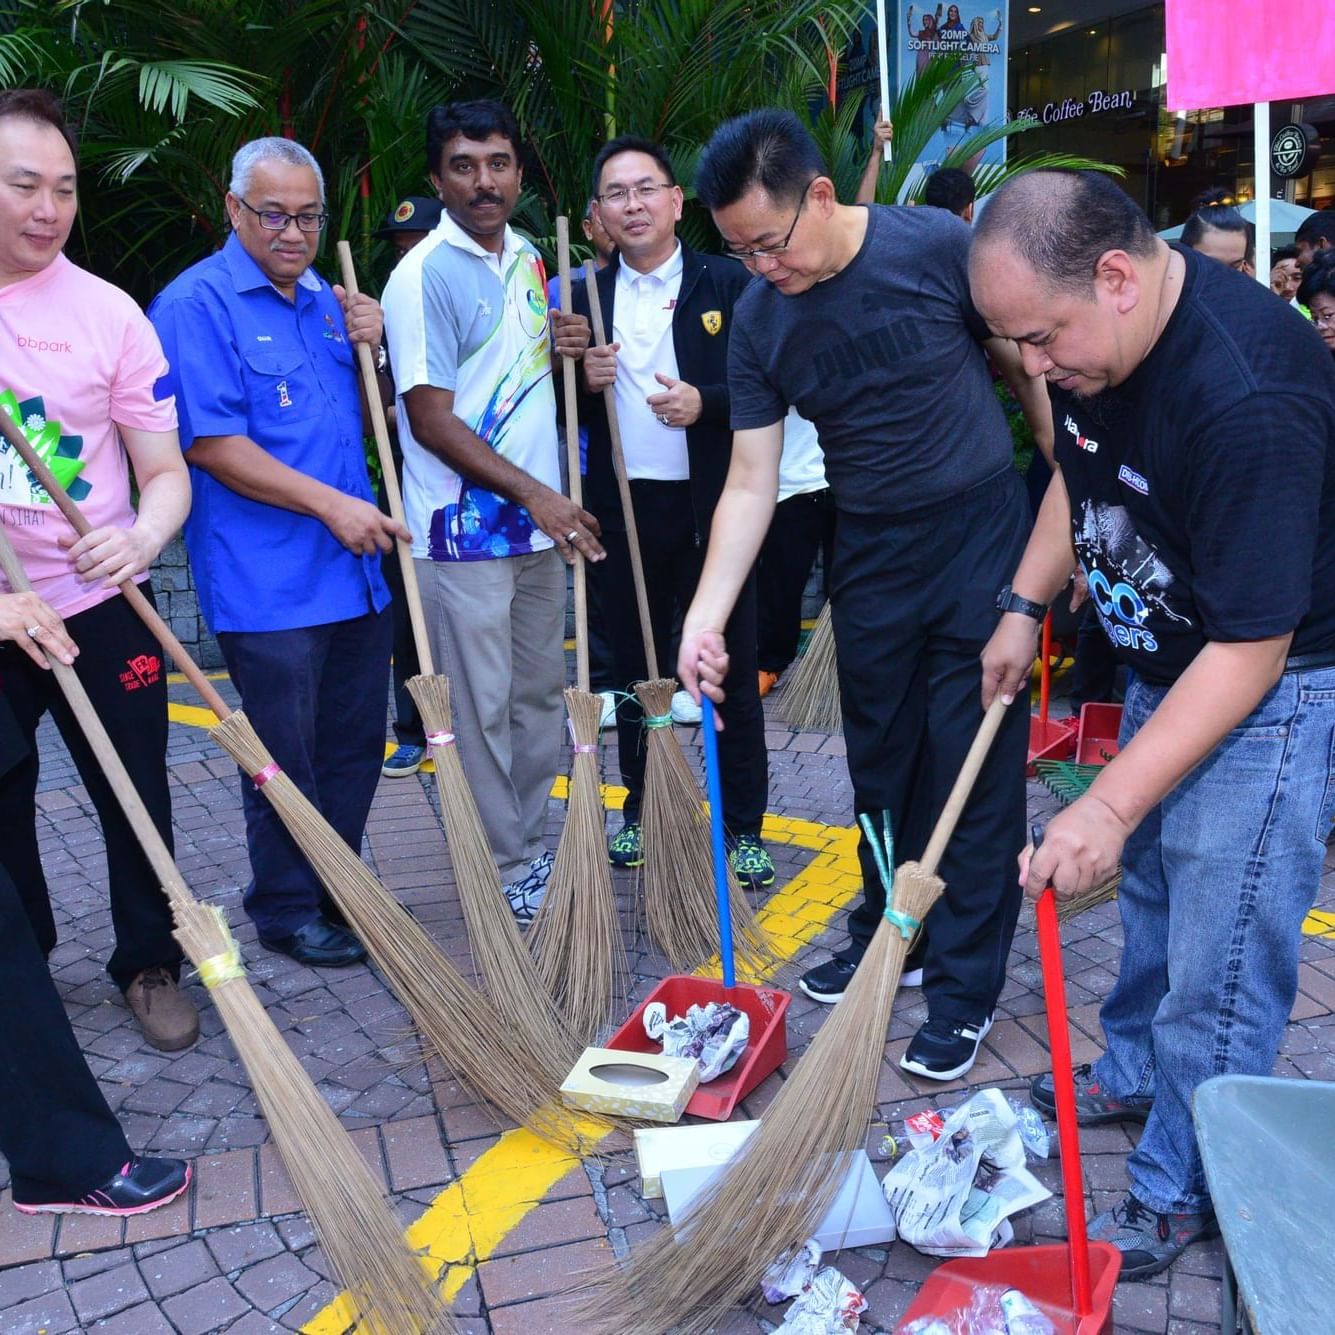 Cleaning campaign near The Federal Hotels International